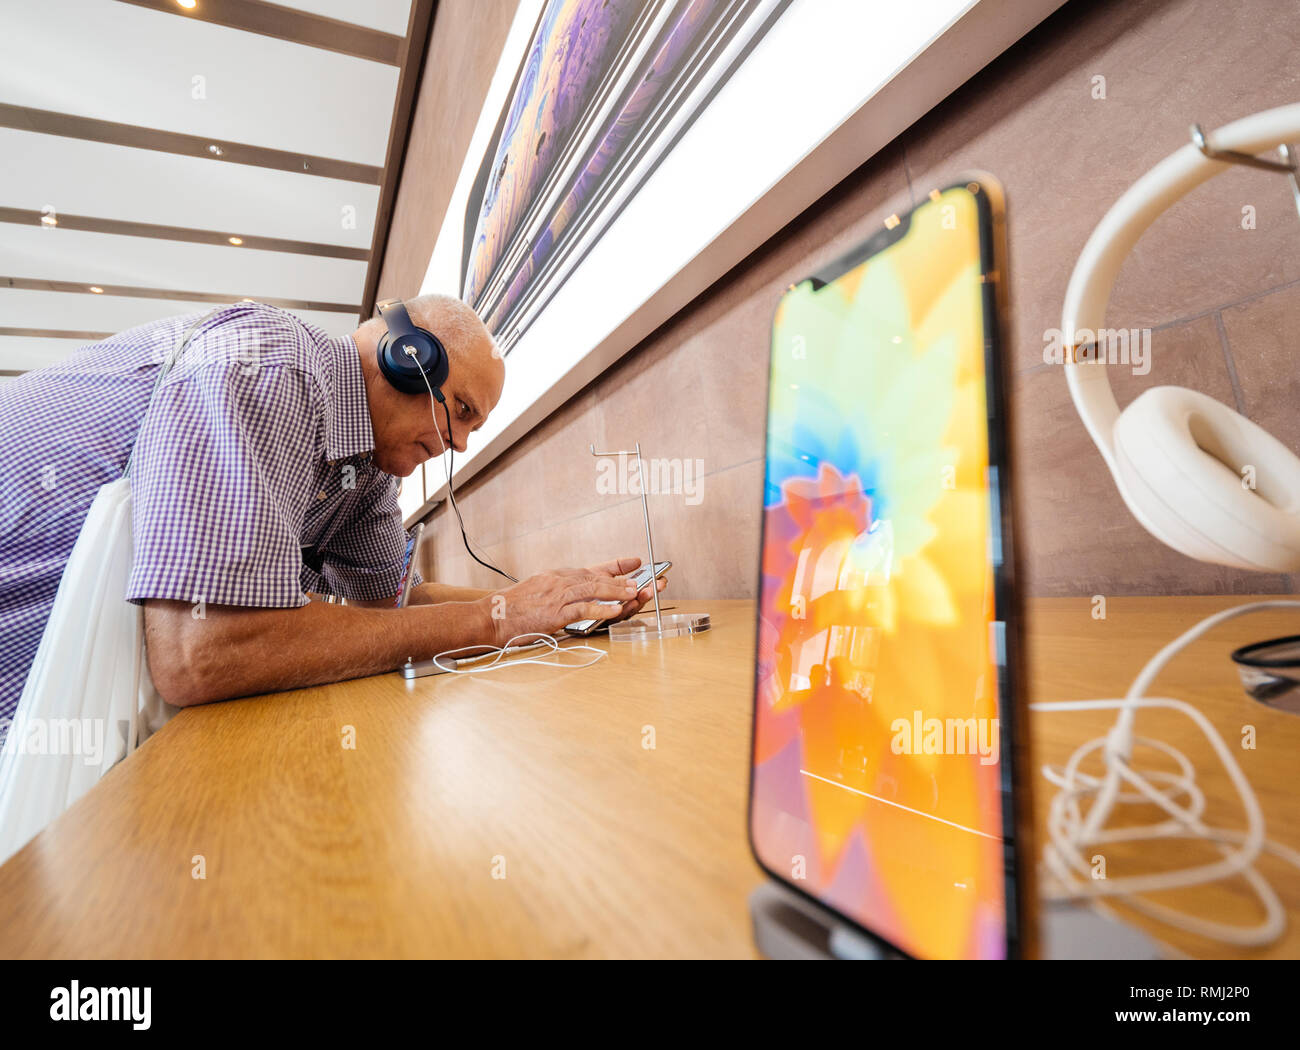 STRASBOURG, FRANCE - SEP 21, 2018: Funny curious senior man testing Apple Beats by Dr Dre headphones with Apple Music on the new iPhone Xs Max smartphones in modern Apple Store - touchscreen  Stock Photo